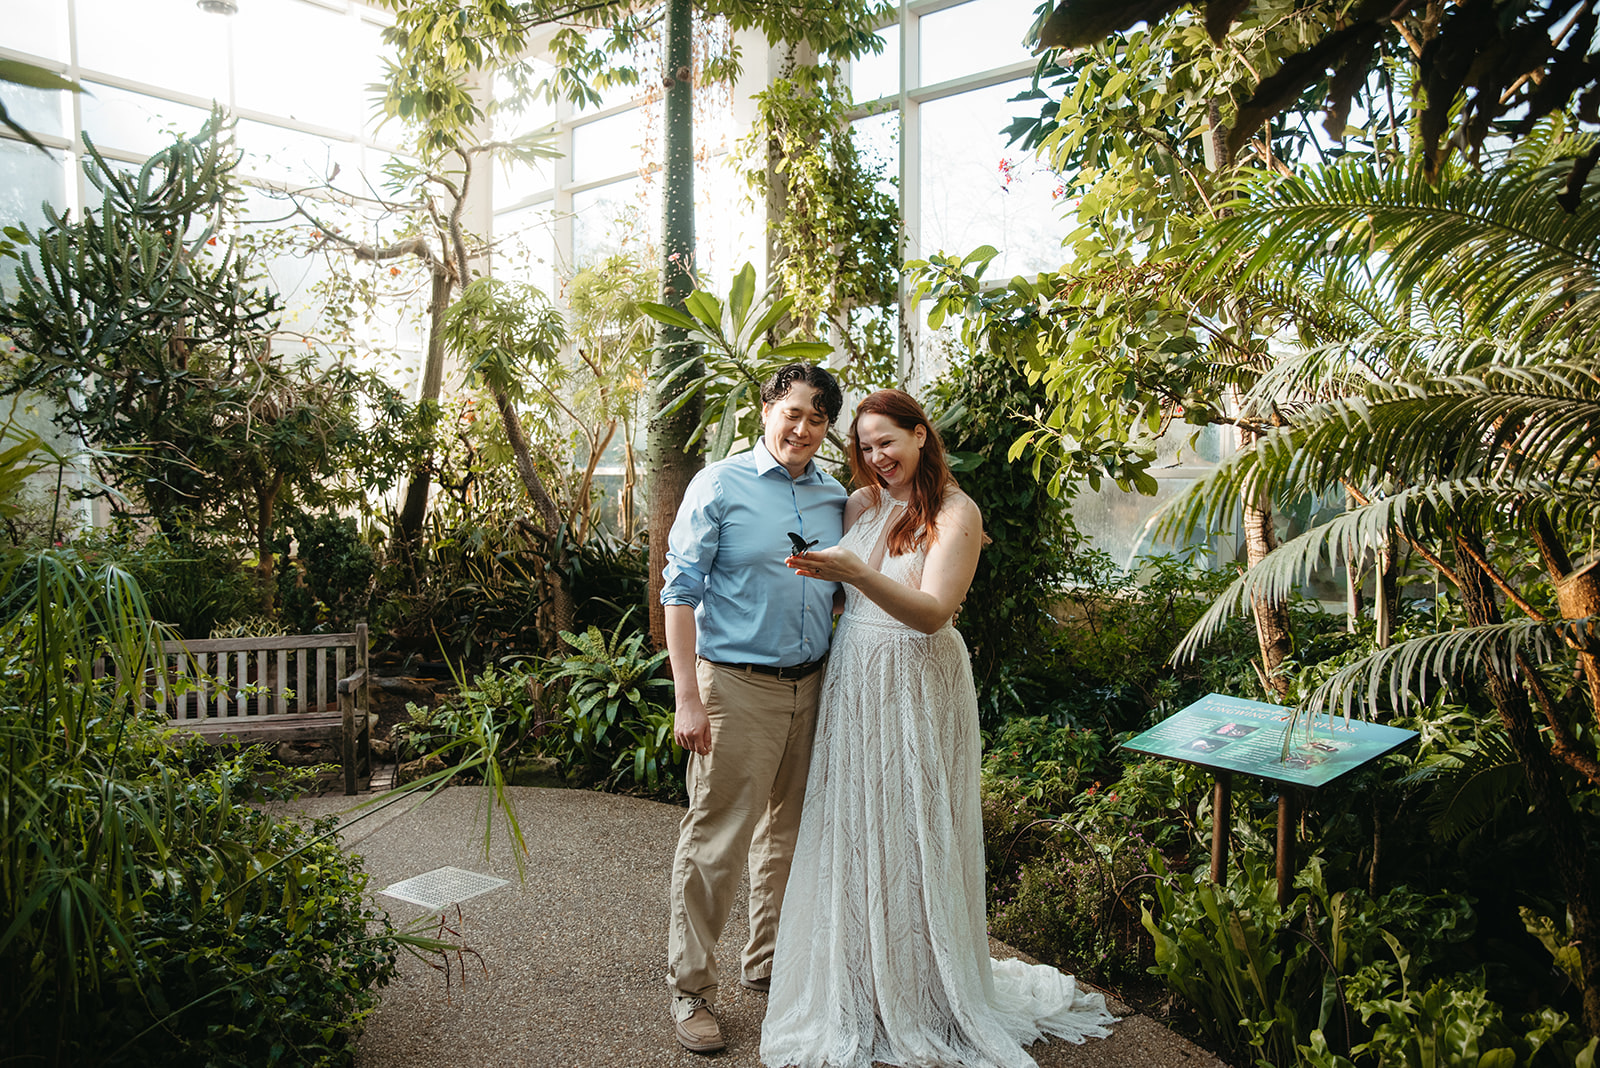 Winter elopement in Durham at the Museum of Life and Science Butterfly House before heading to the Durham courthouse. 